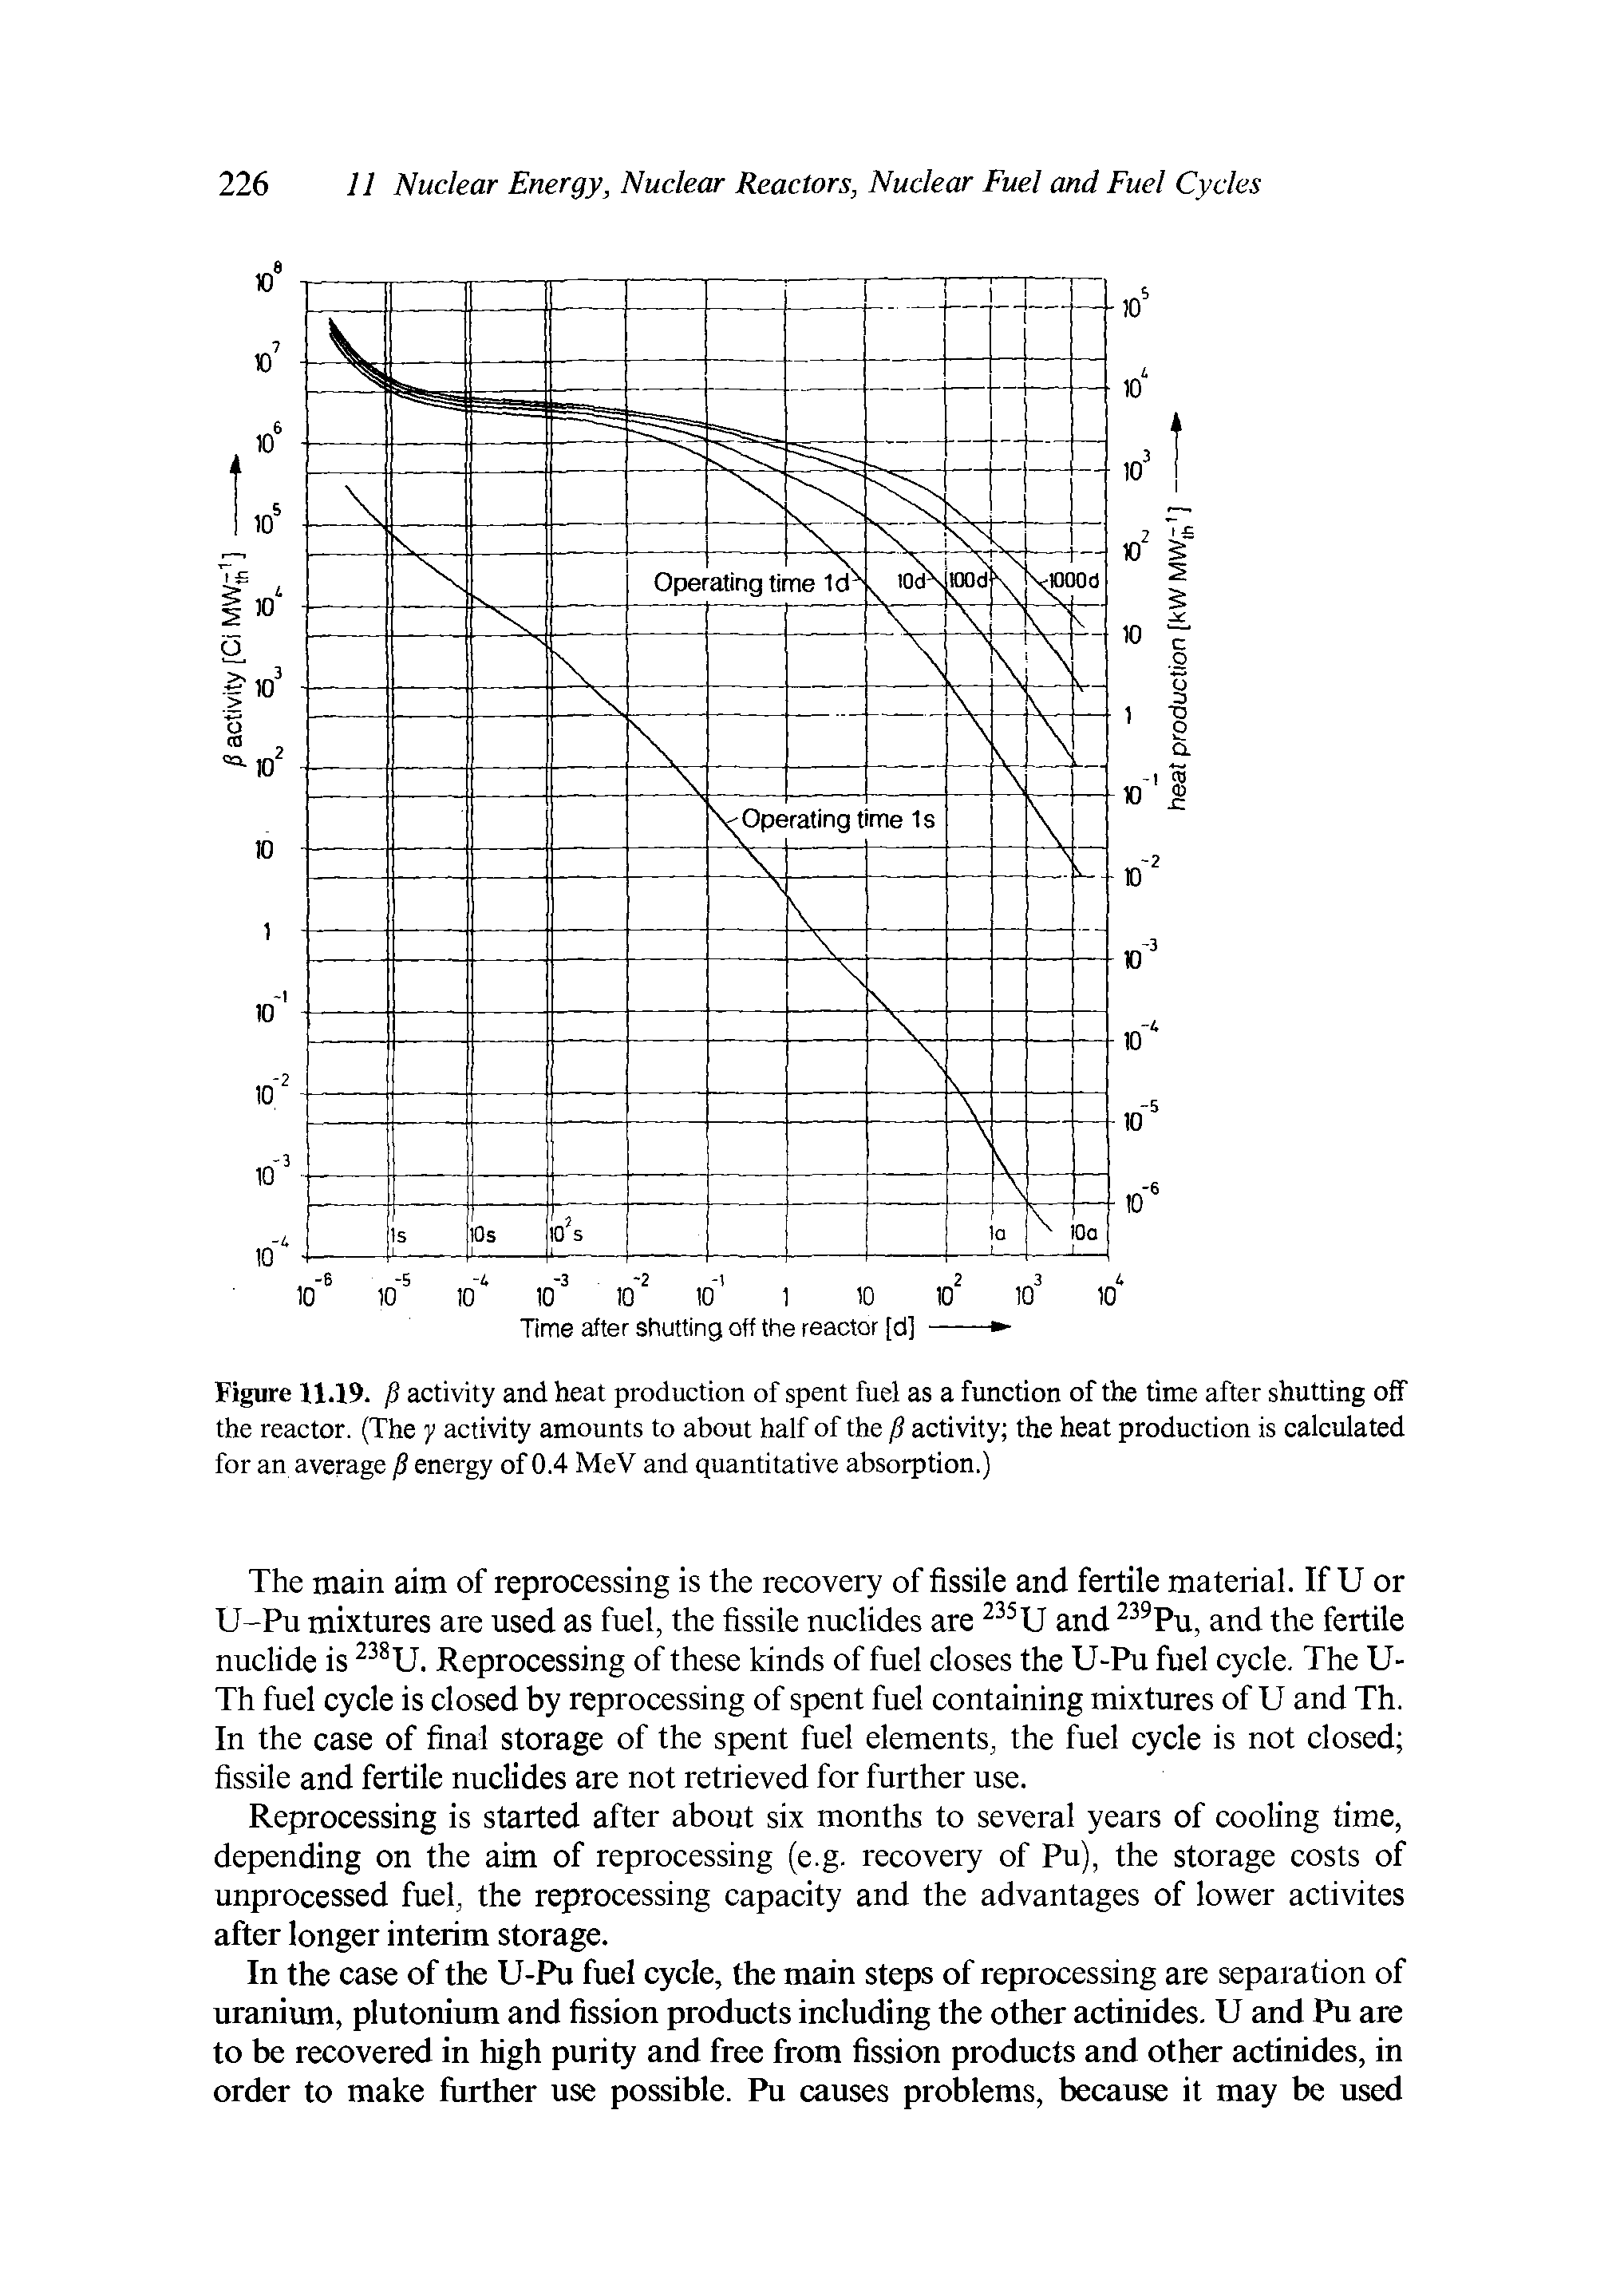 Figure 11.19. /S activity and heat production of spent fuel as a function of the time after shutting off the reactor. (The y activity amounts to about half of the / activity the heat production is calculated for an average jS energy of 0.4 MeV and quantitative absorption.)...